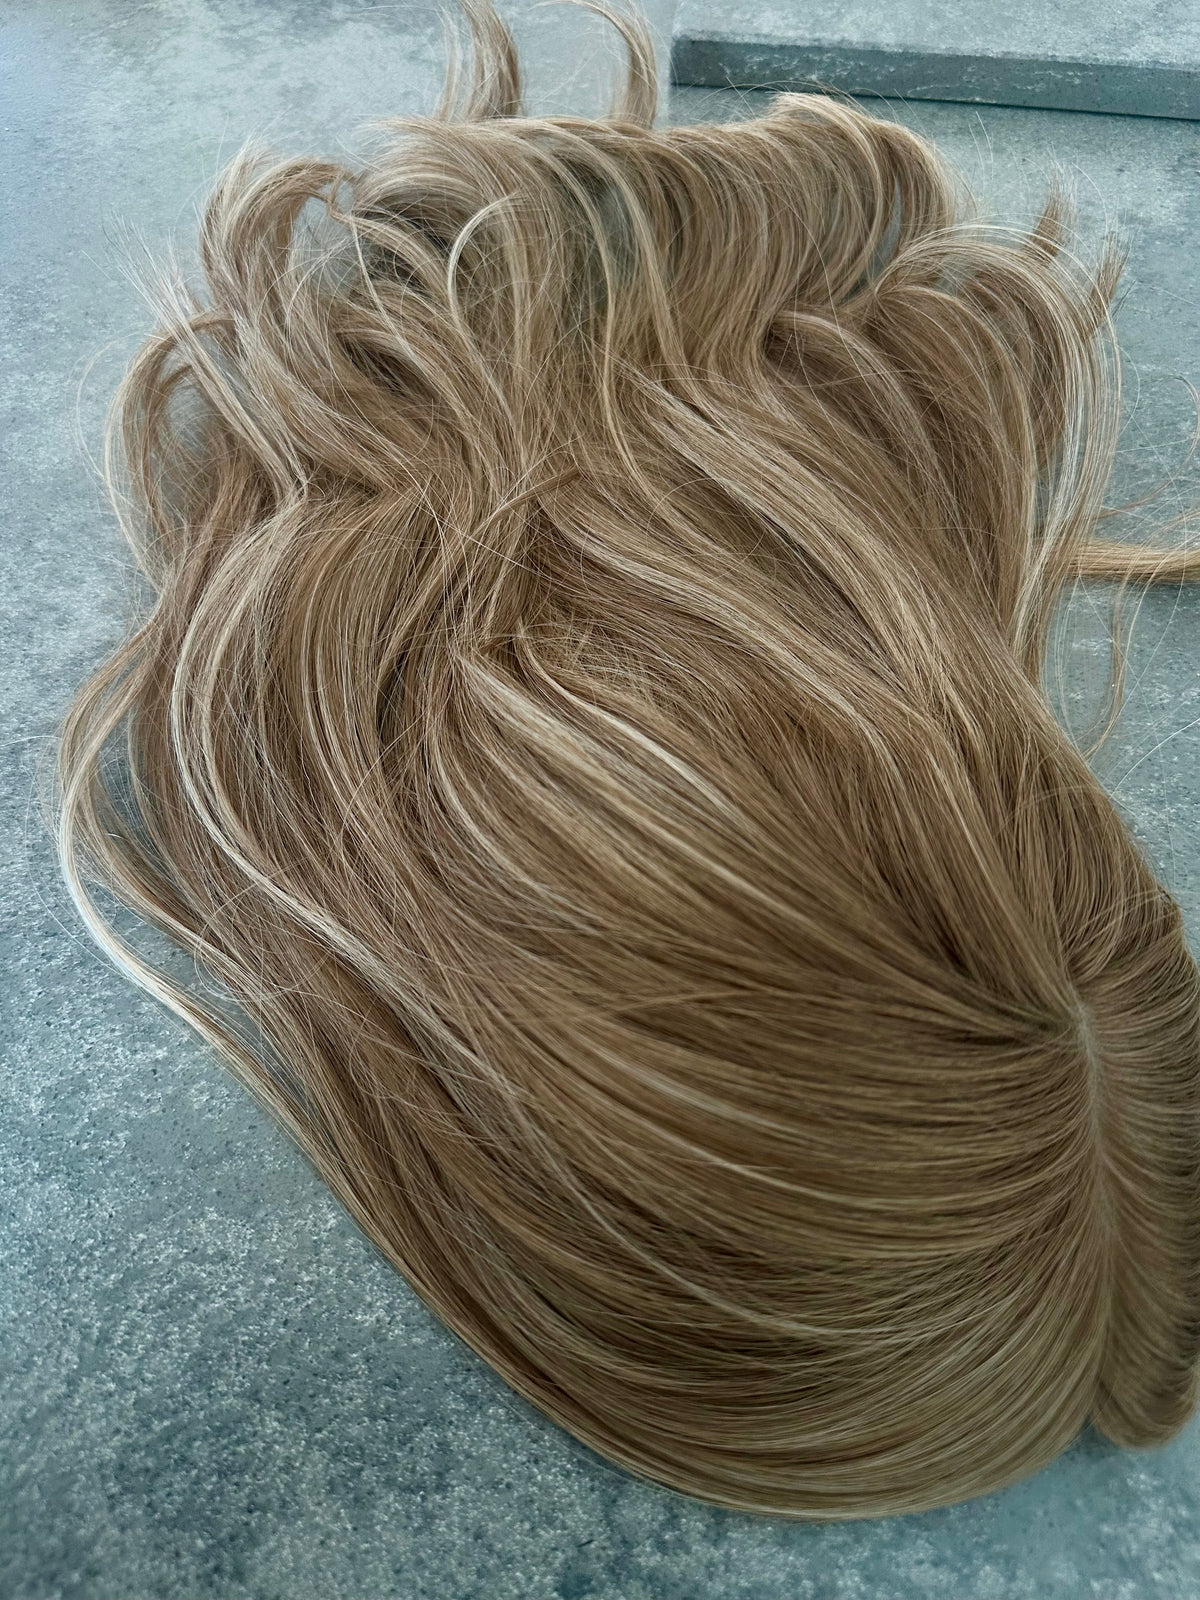 New - Elena - Warm blonde with highlights - Hair Topper (8x8 cap / 14-16" length)